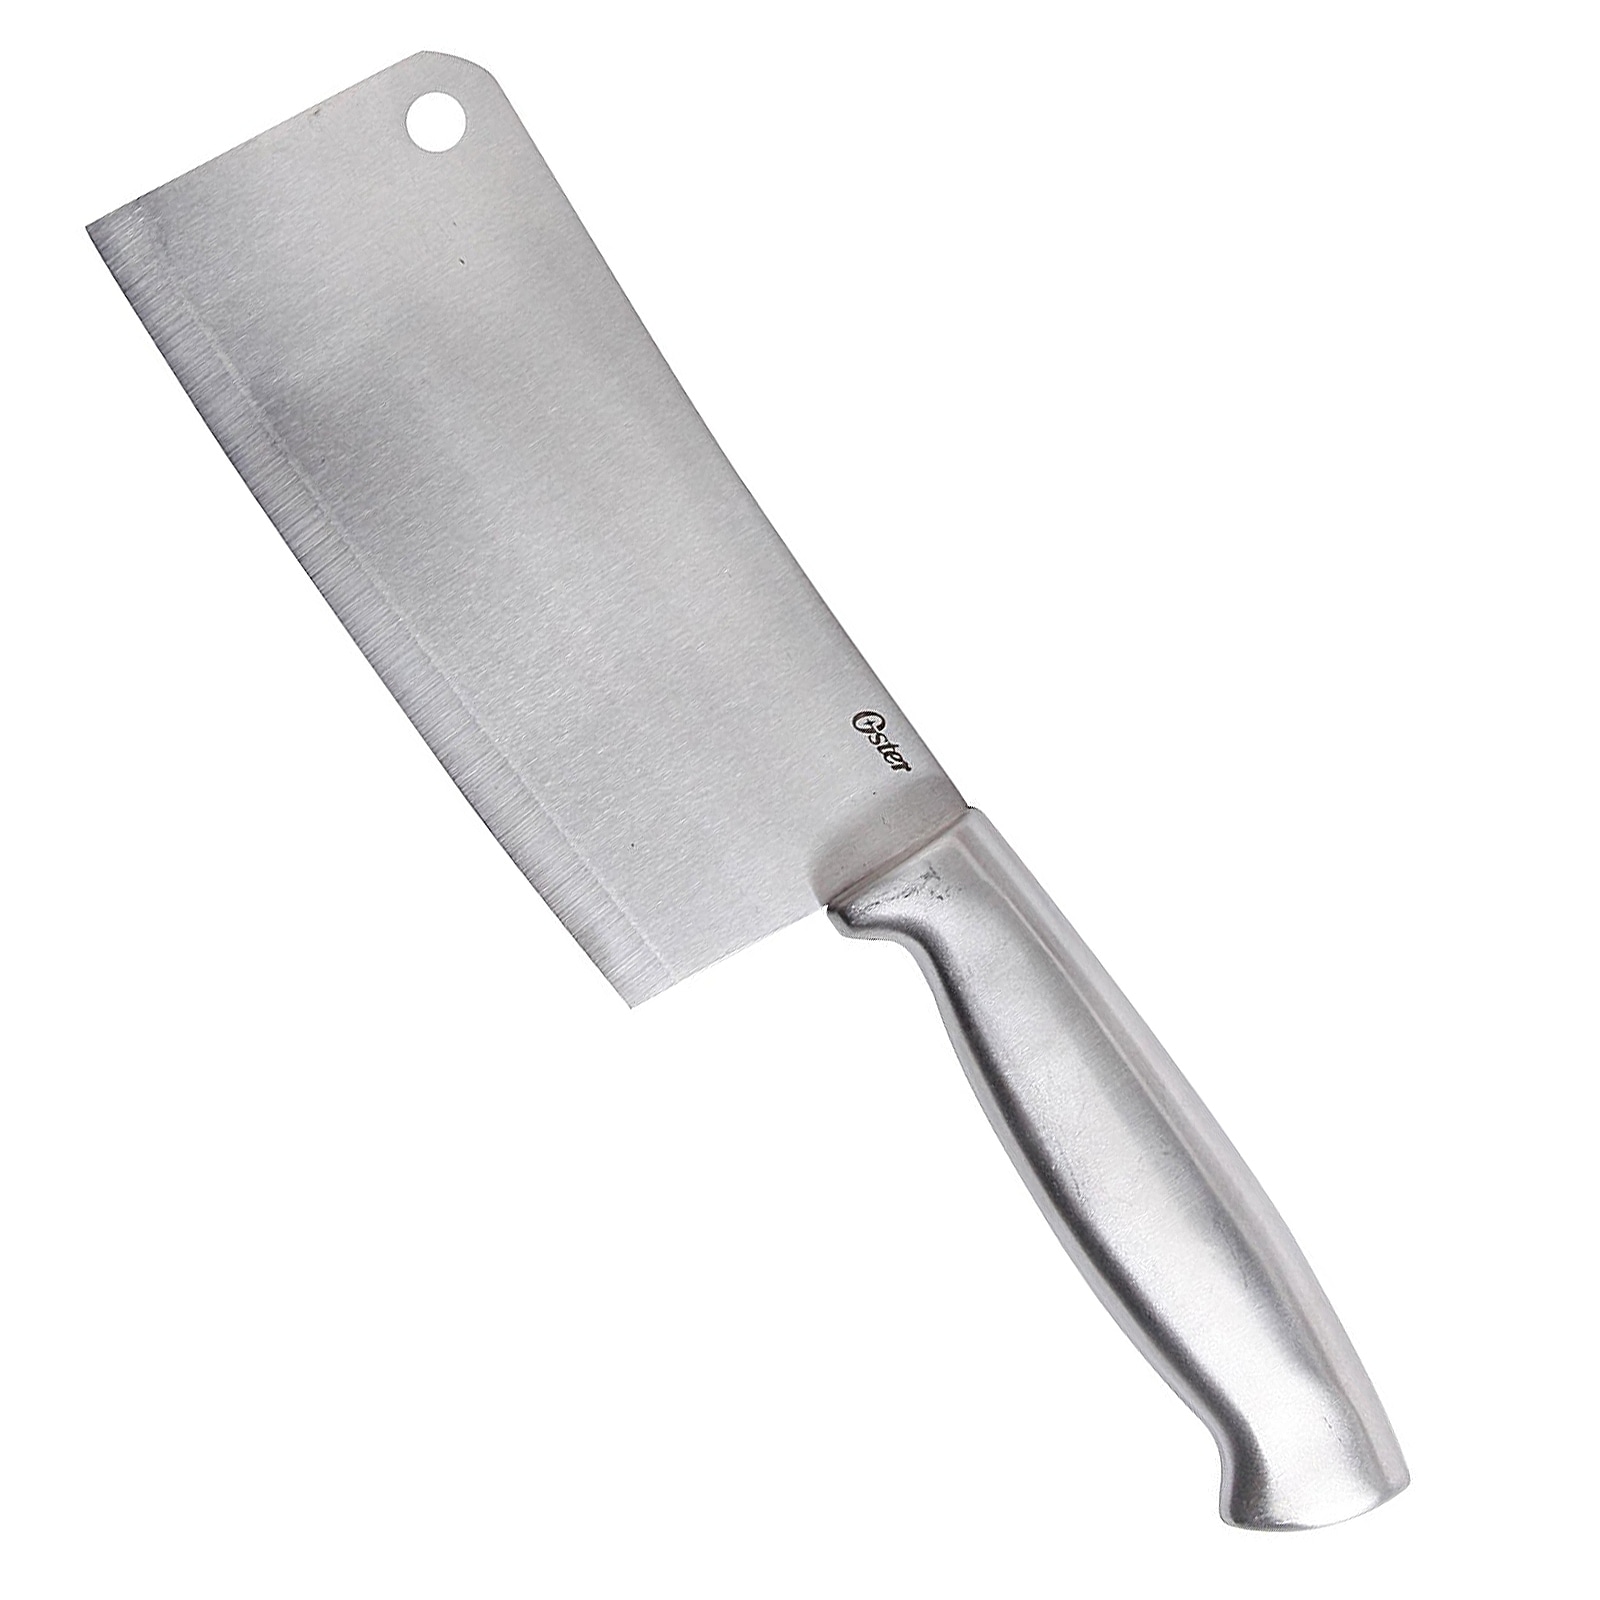 Global G-12 Classic 6.25 inch Meat Cleaver